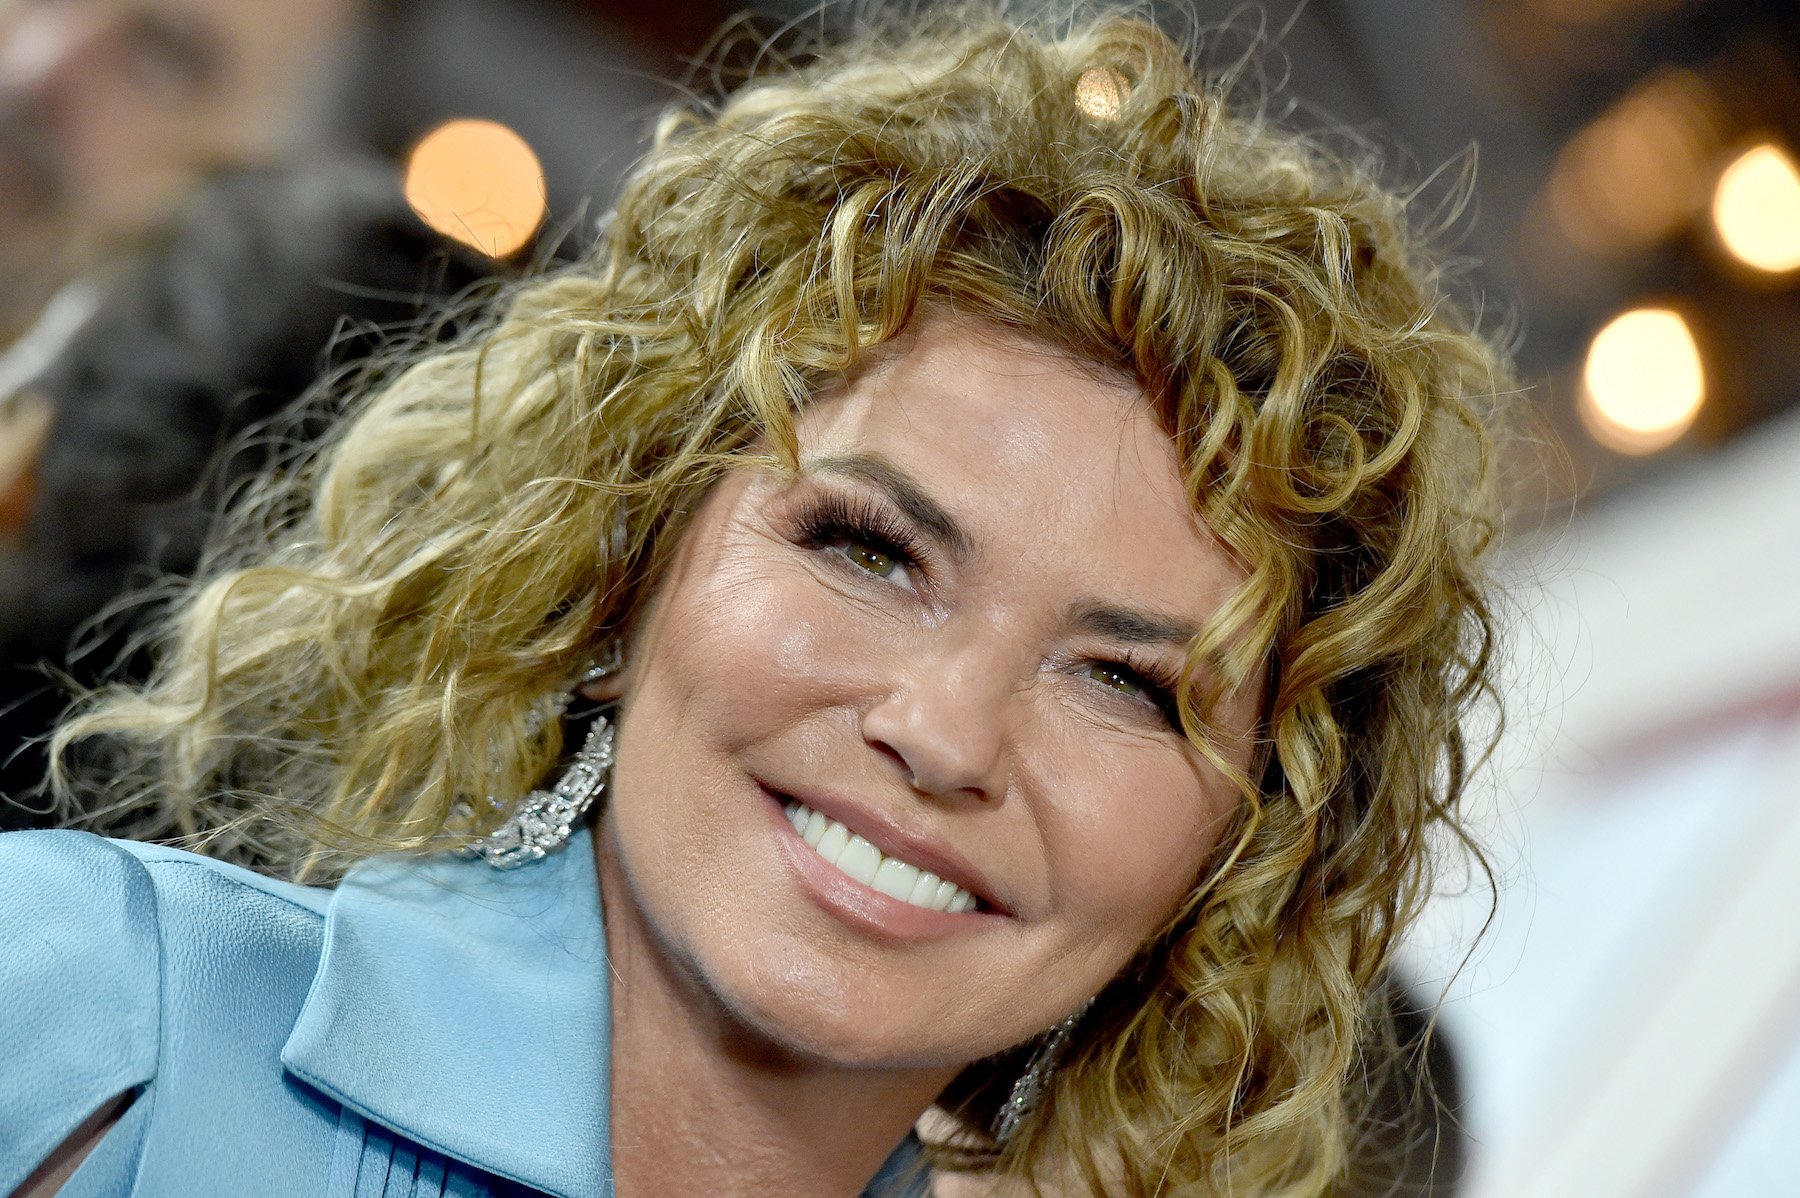 Shania Twain, whose mom lit a cigarette after giving birth to her, wearing a turquoise suit